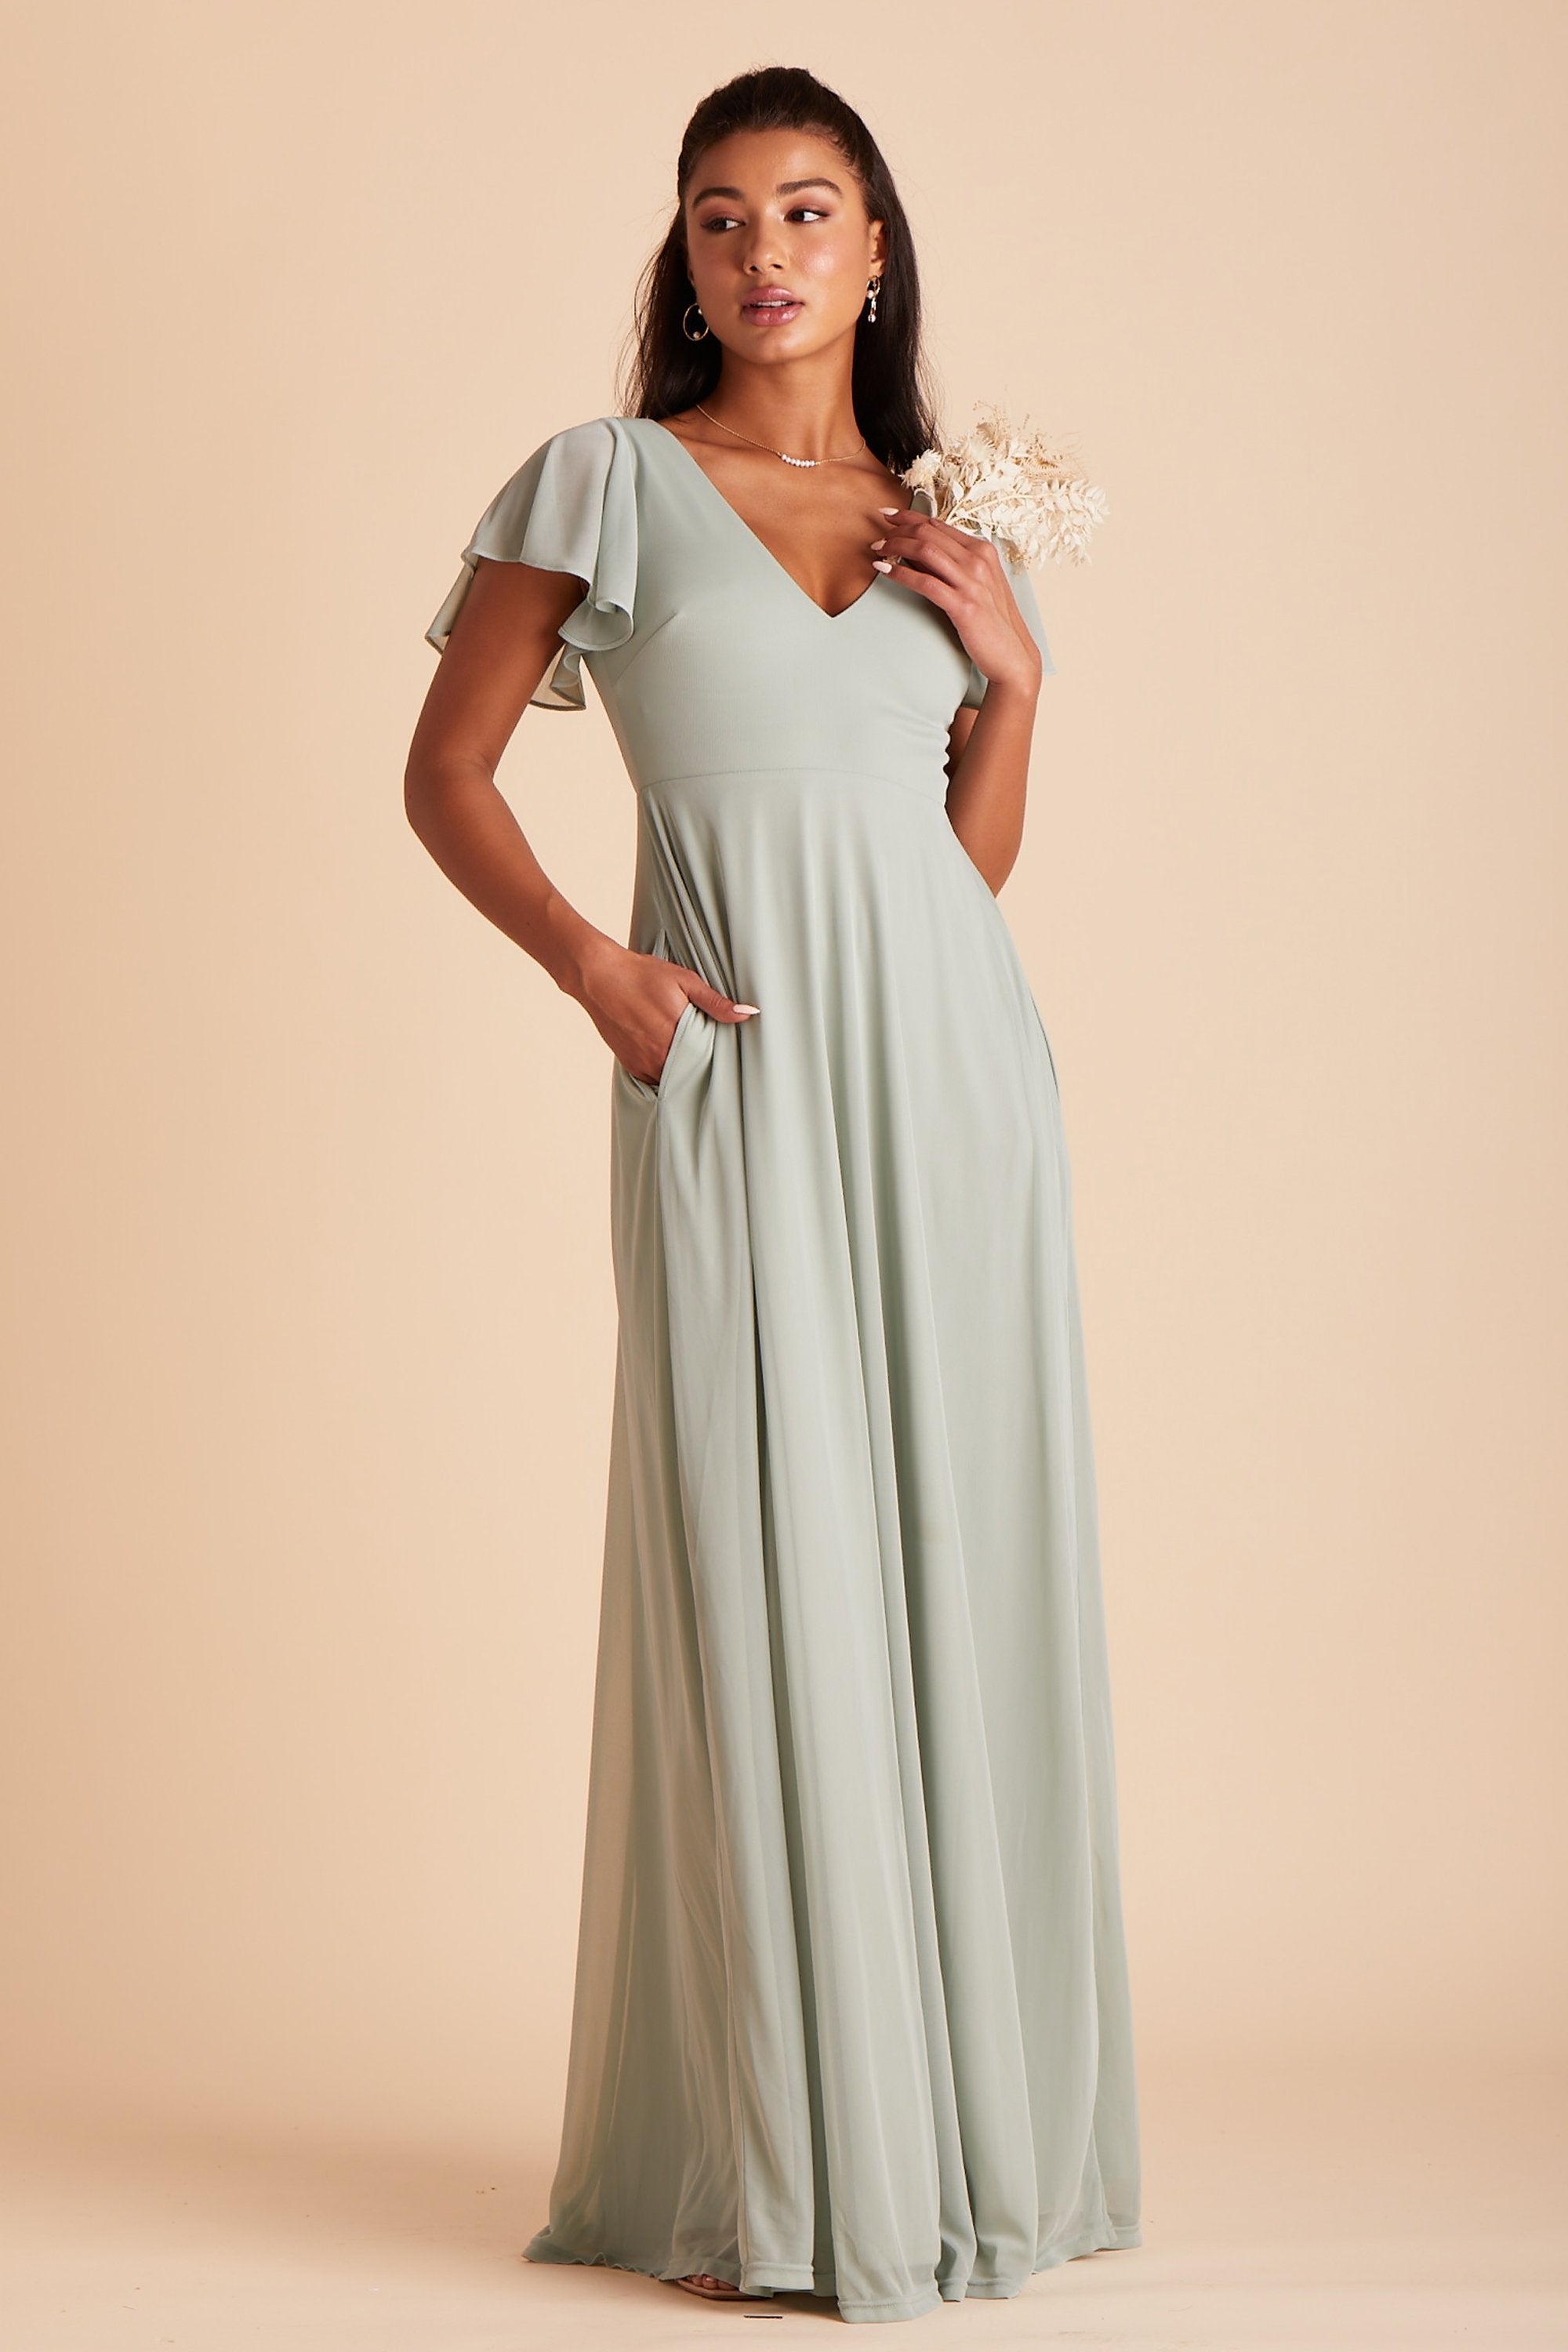 Hannah bridesmaids dress in sage green mesh by Birdy Grey, front view with hand in pocket